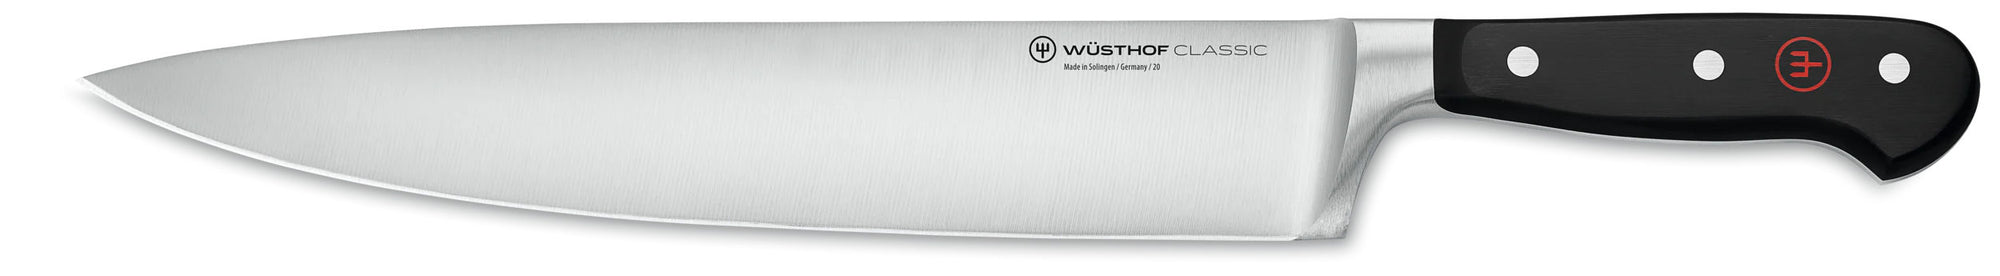 Wusthof Classic Cook's Knife, 10-inch (26 cm) - 4582-26